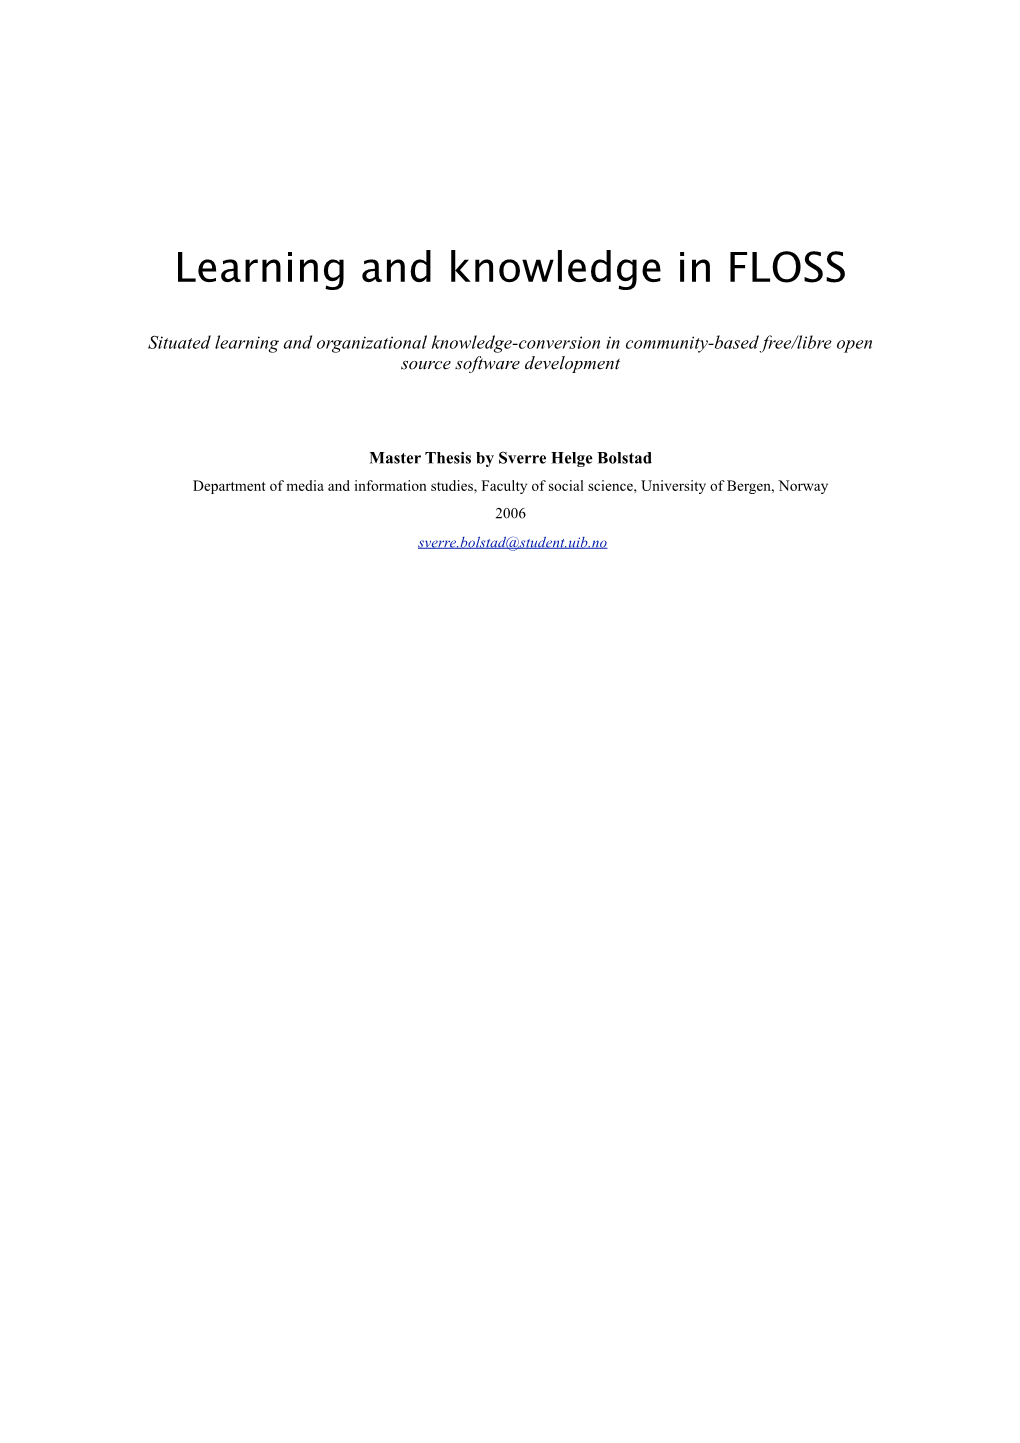 Learning and Knowledge in FLOSS